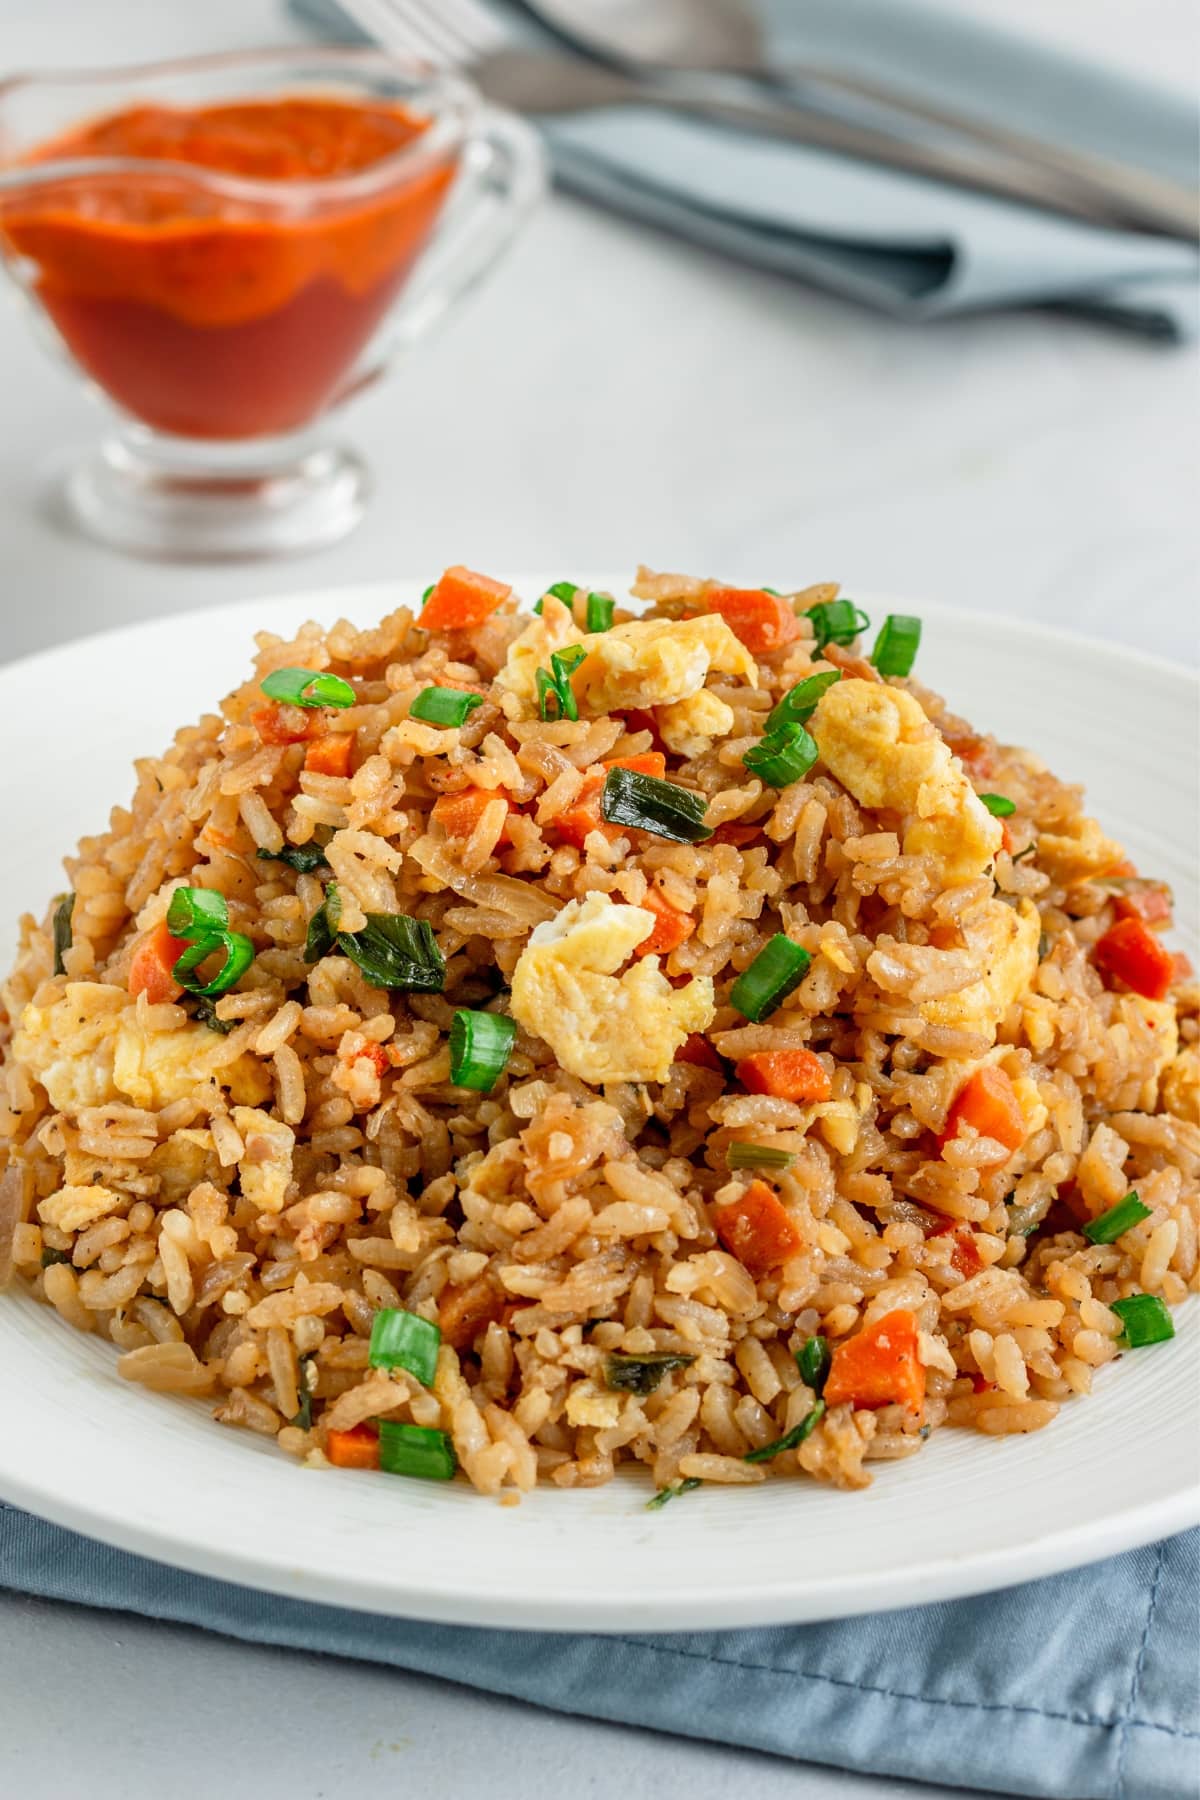 Platter of Panda Express Fried Rice with egg, carrots and sliced green onions